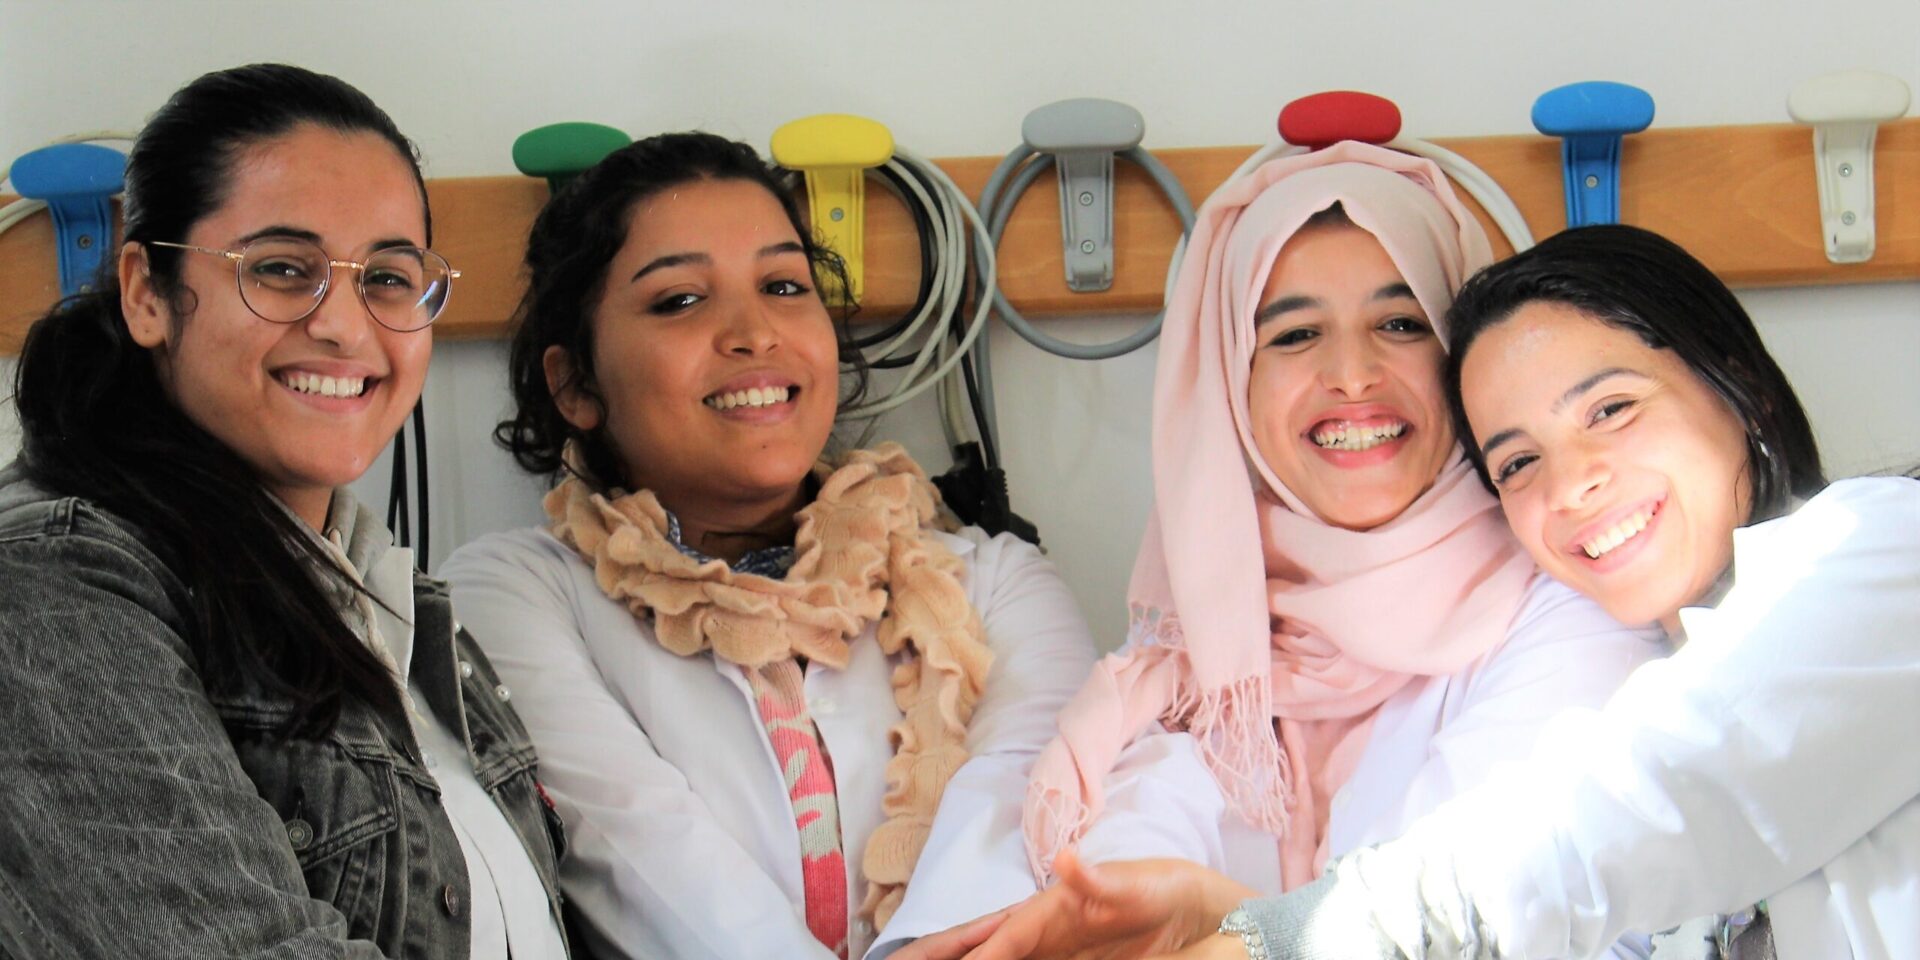 A group of four female students